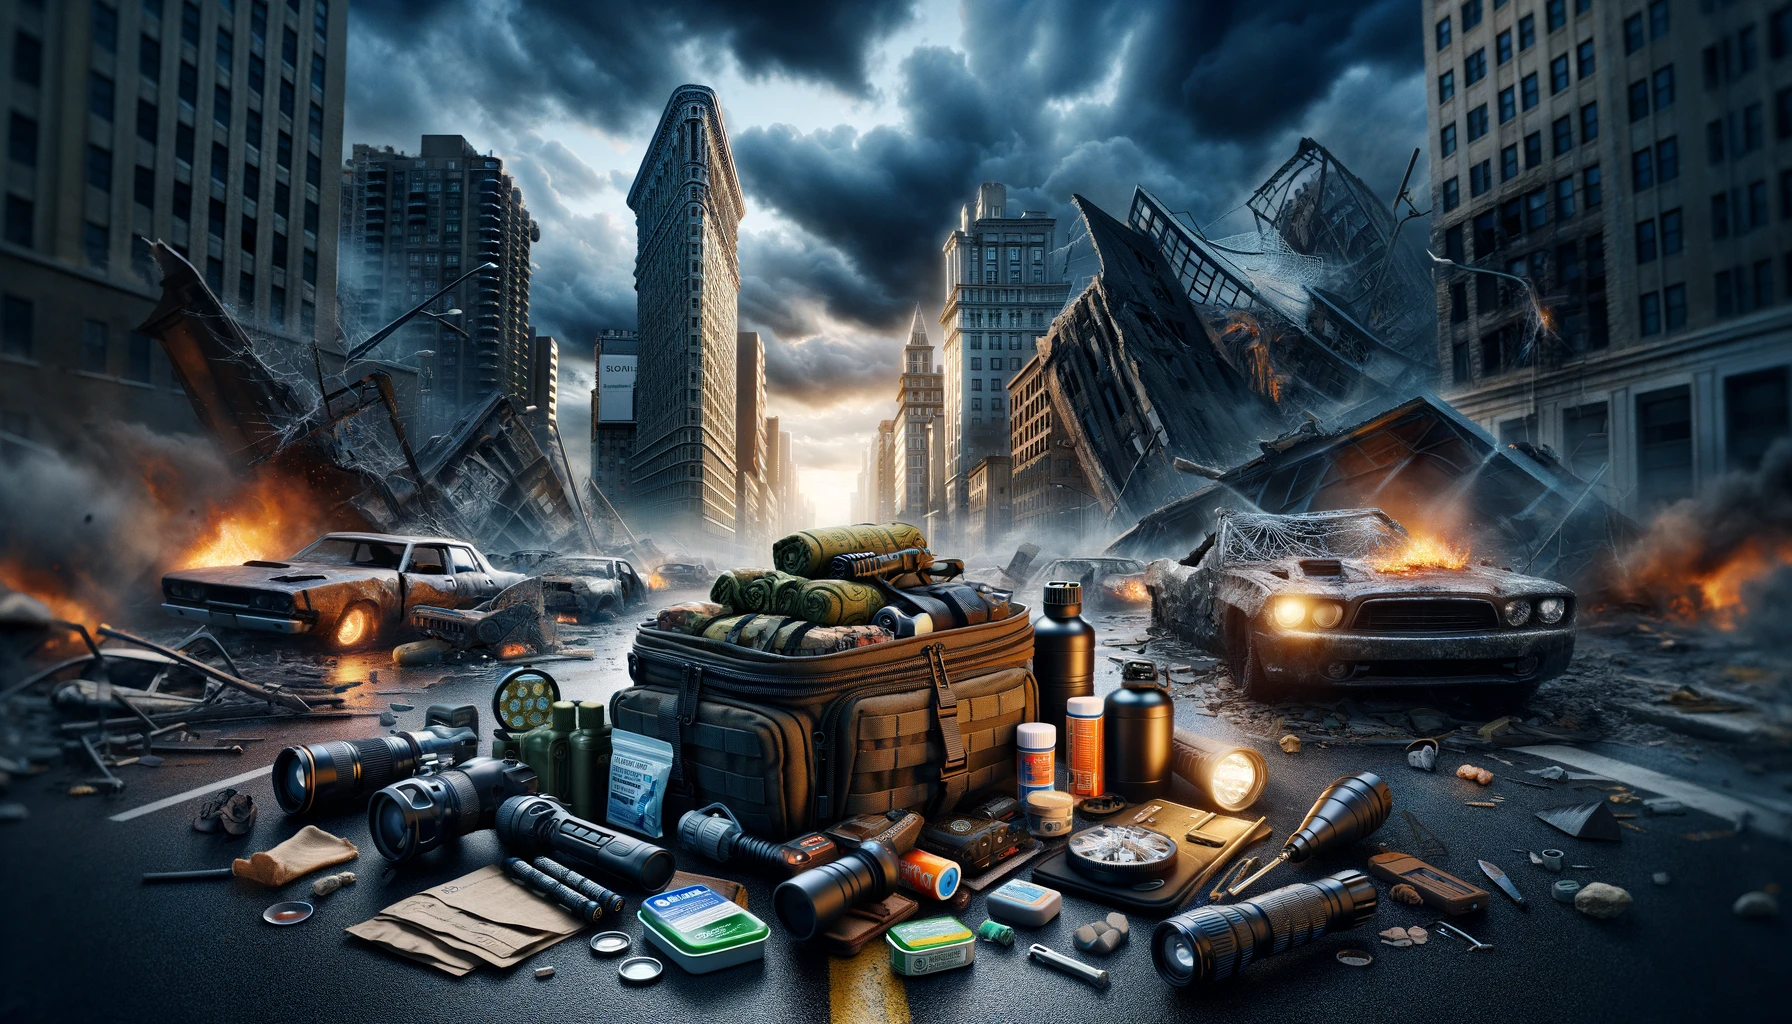 Enhanced urban survival scene with a detailed survival kit including high-tech water filtration, survival rations, emergency radio, and tactical flashlight, amidst a post-apocalyptic city with shattered buildings and flickering lights under a stormy dusk sky, emphasizing the gravity of urban survival preparedness